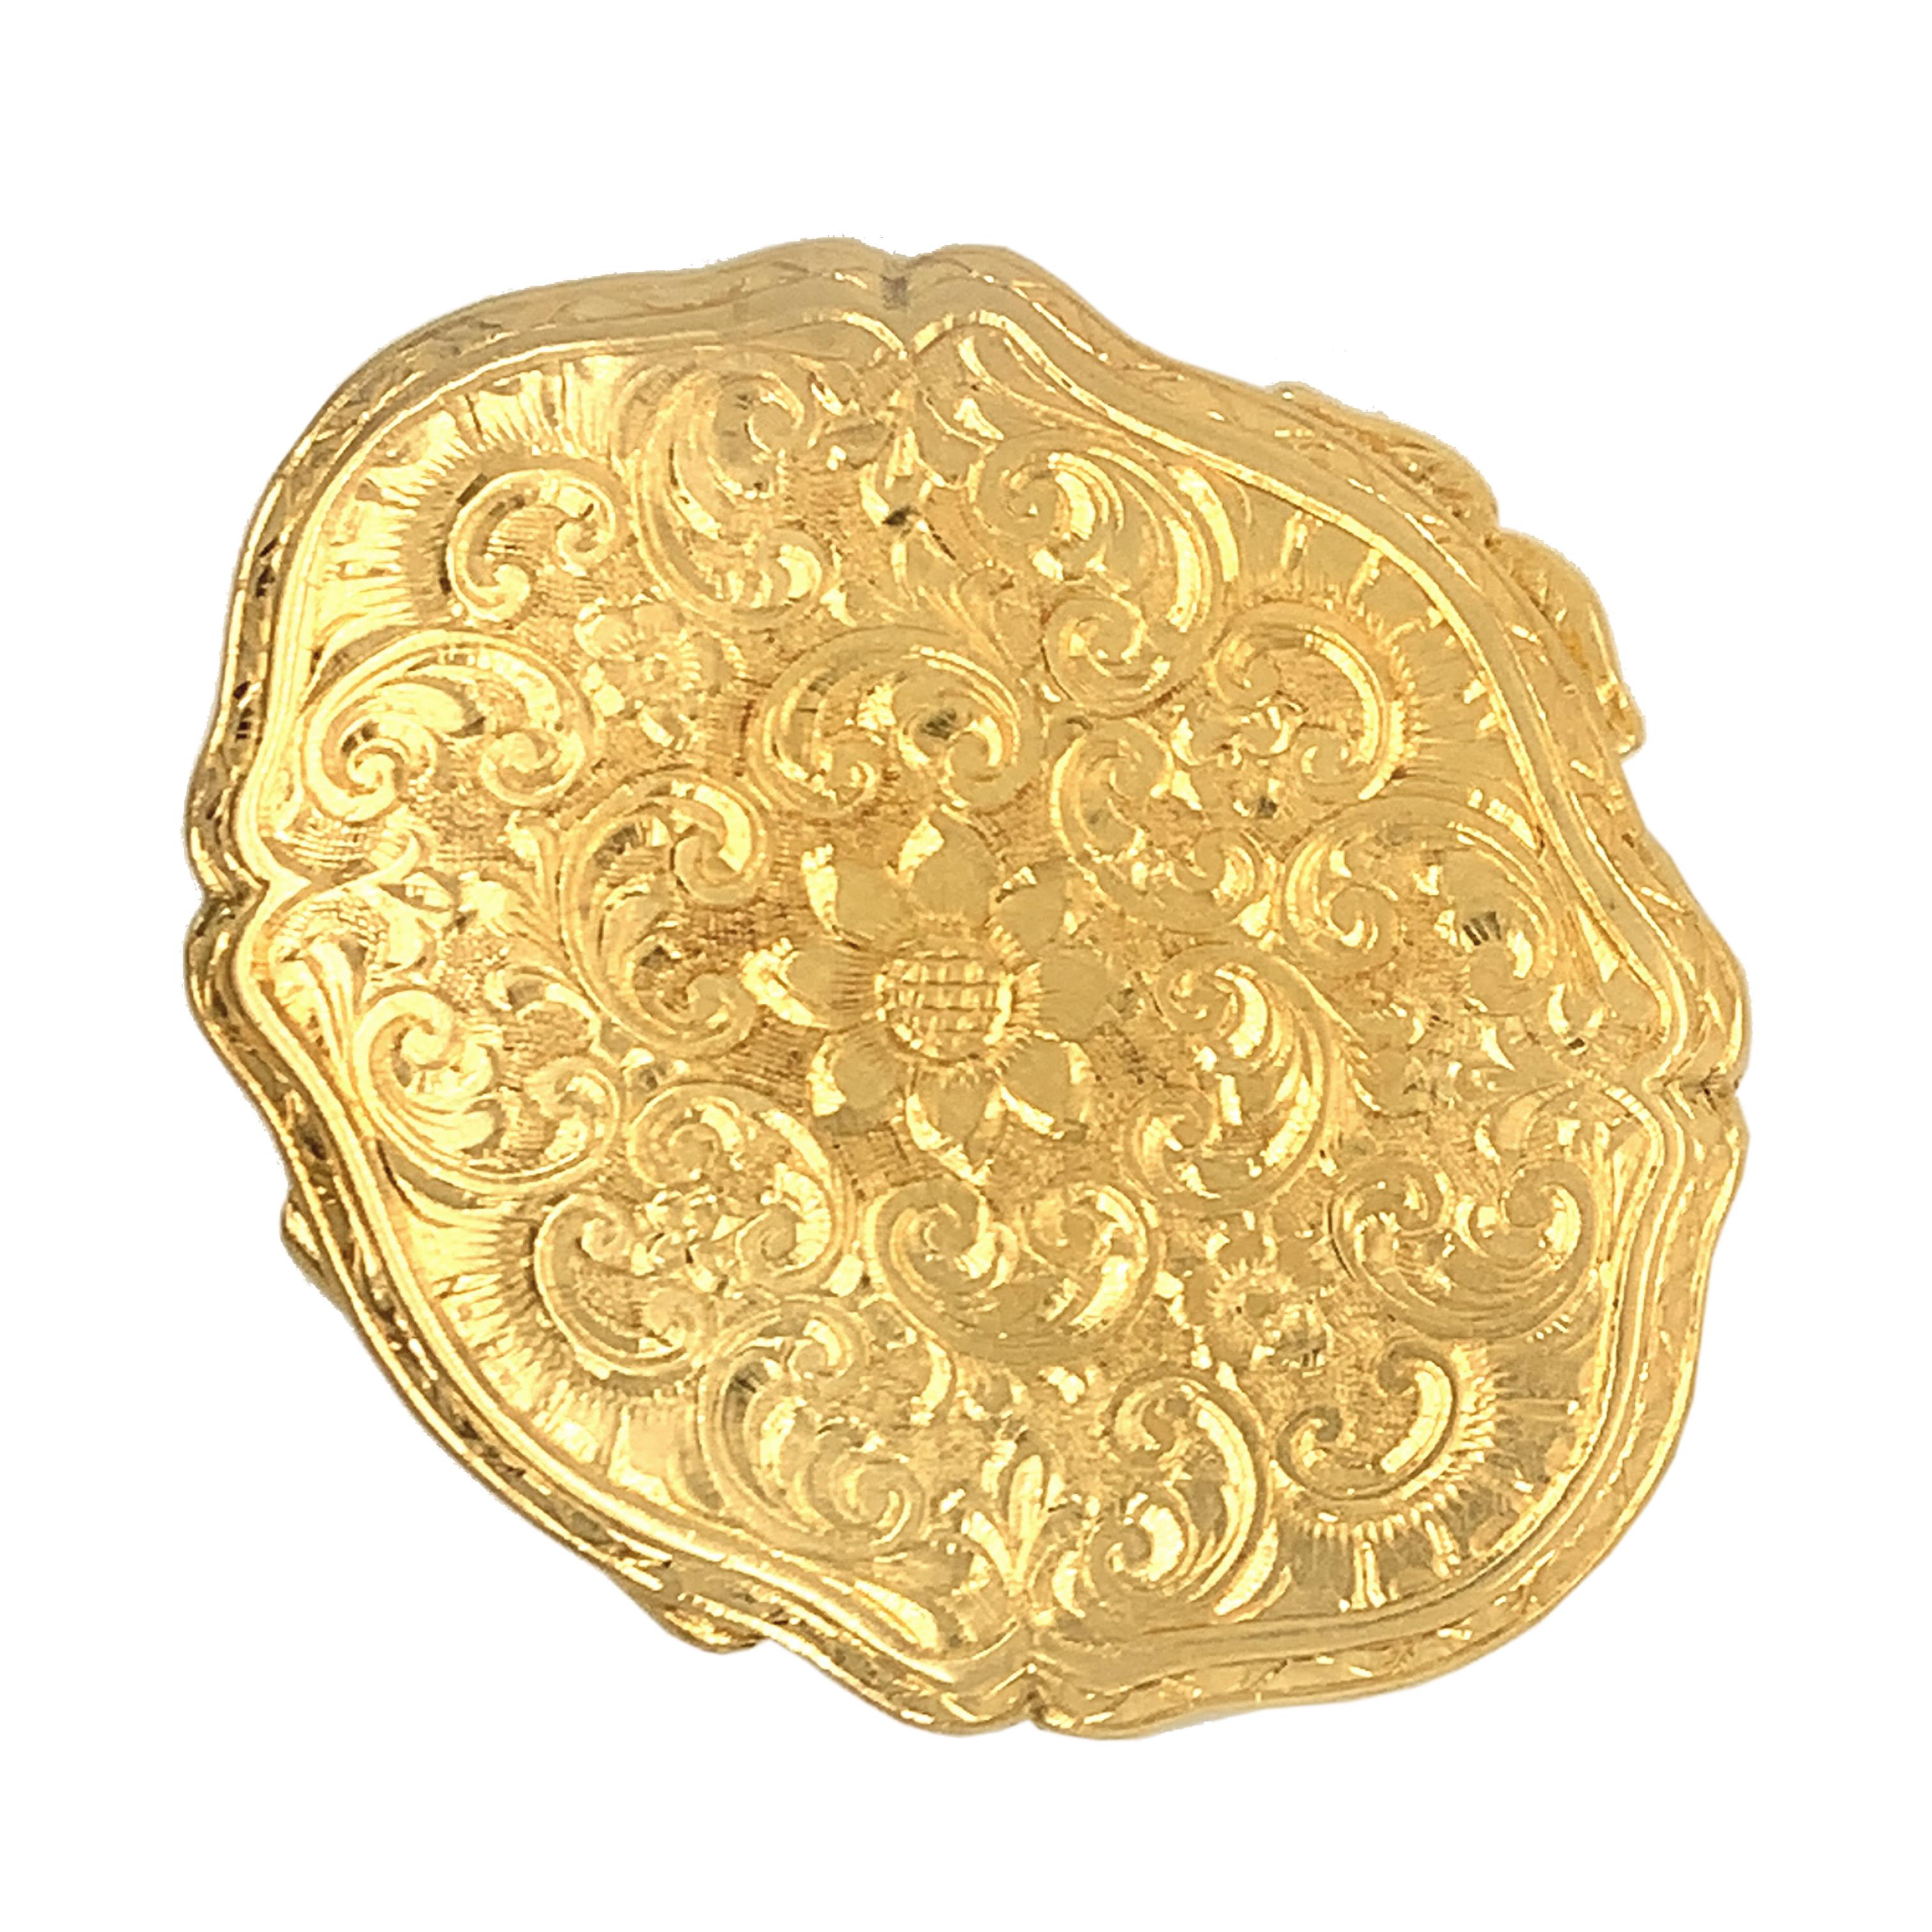 Beautifully detailed pill box with hand-engraving throughout. The careful faceting within the gold captures light at every angle, adding to its already luxurious fabrication. Meticulously hand engraved; a central figural flower radiates out into a